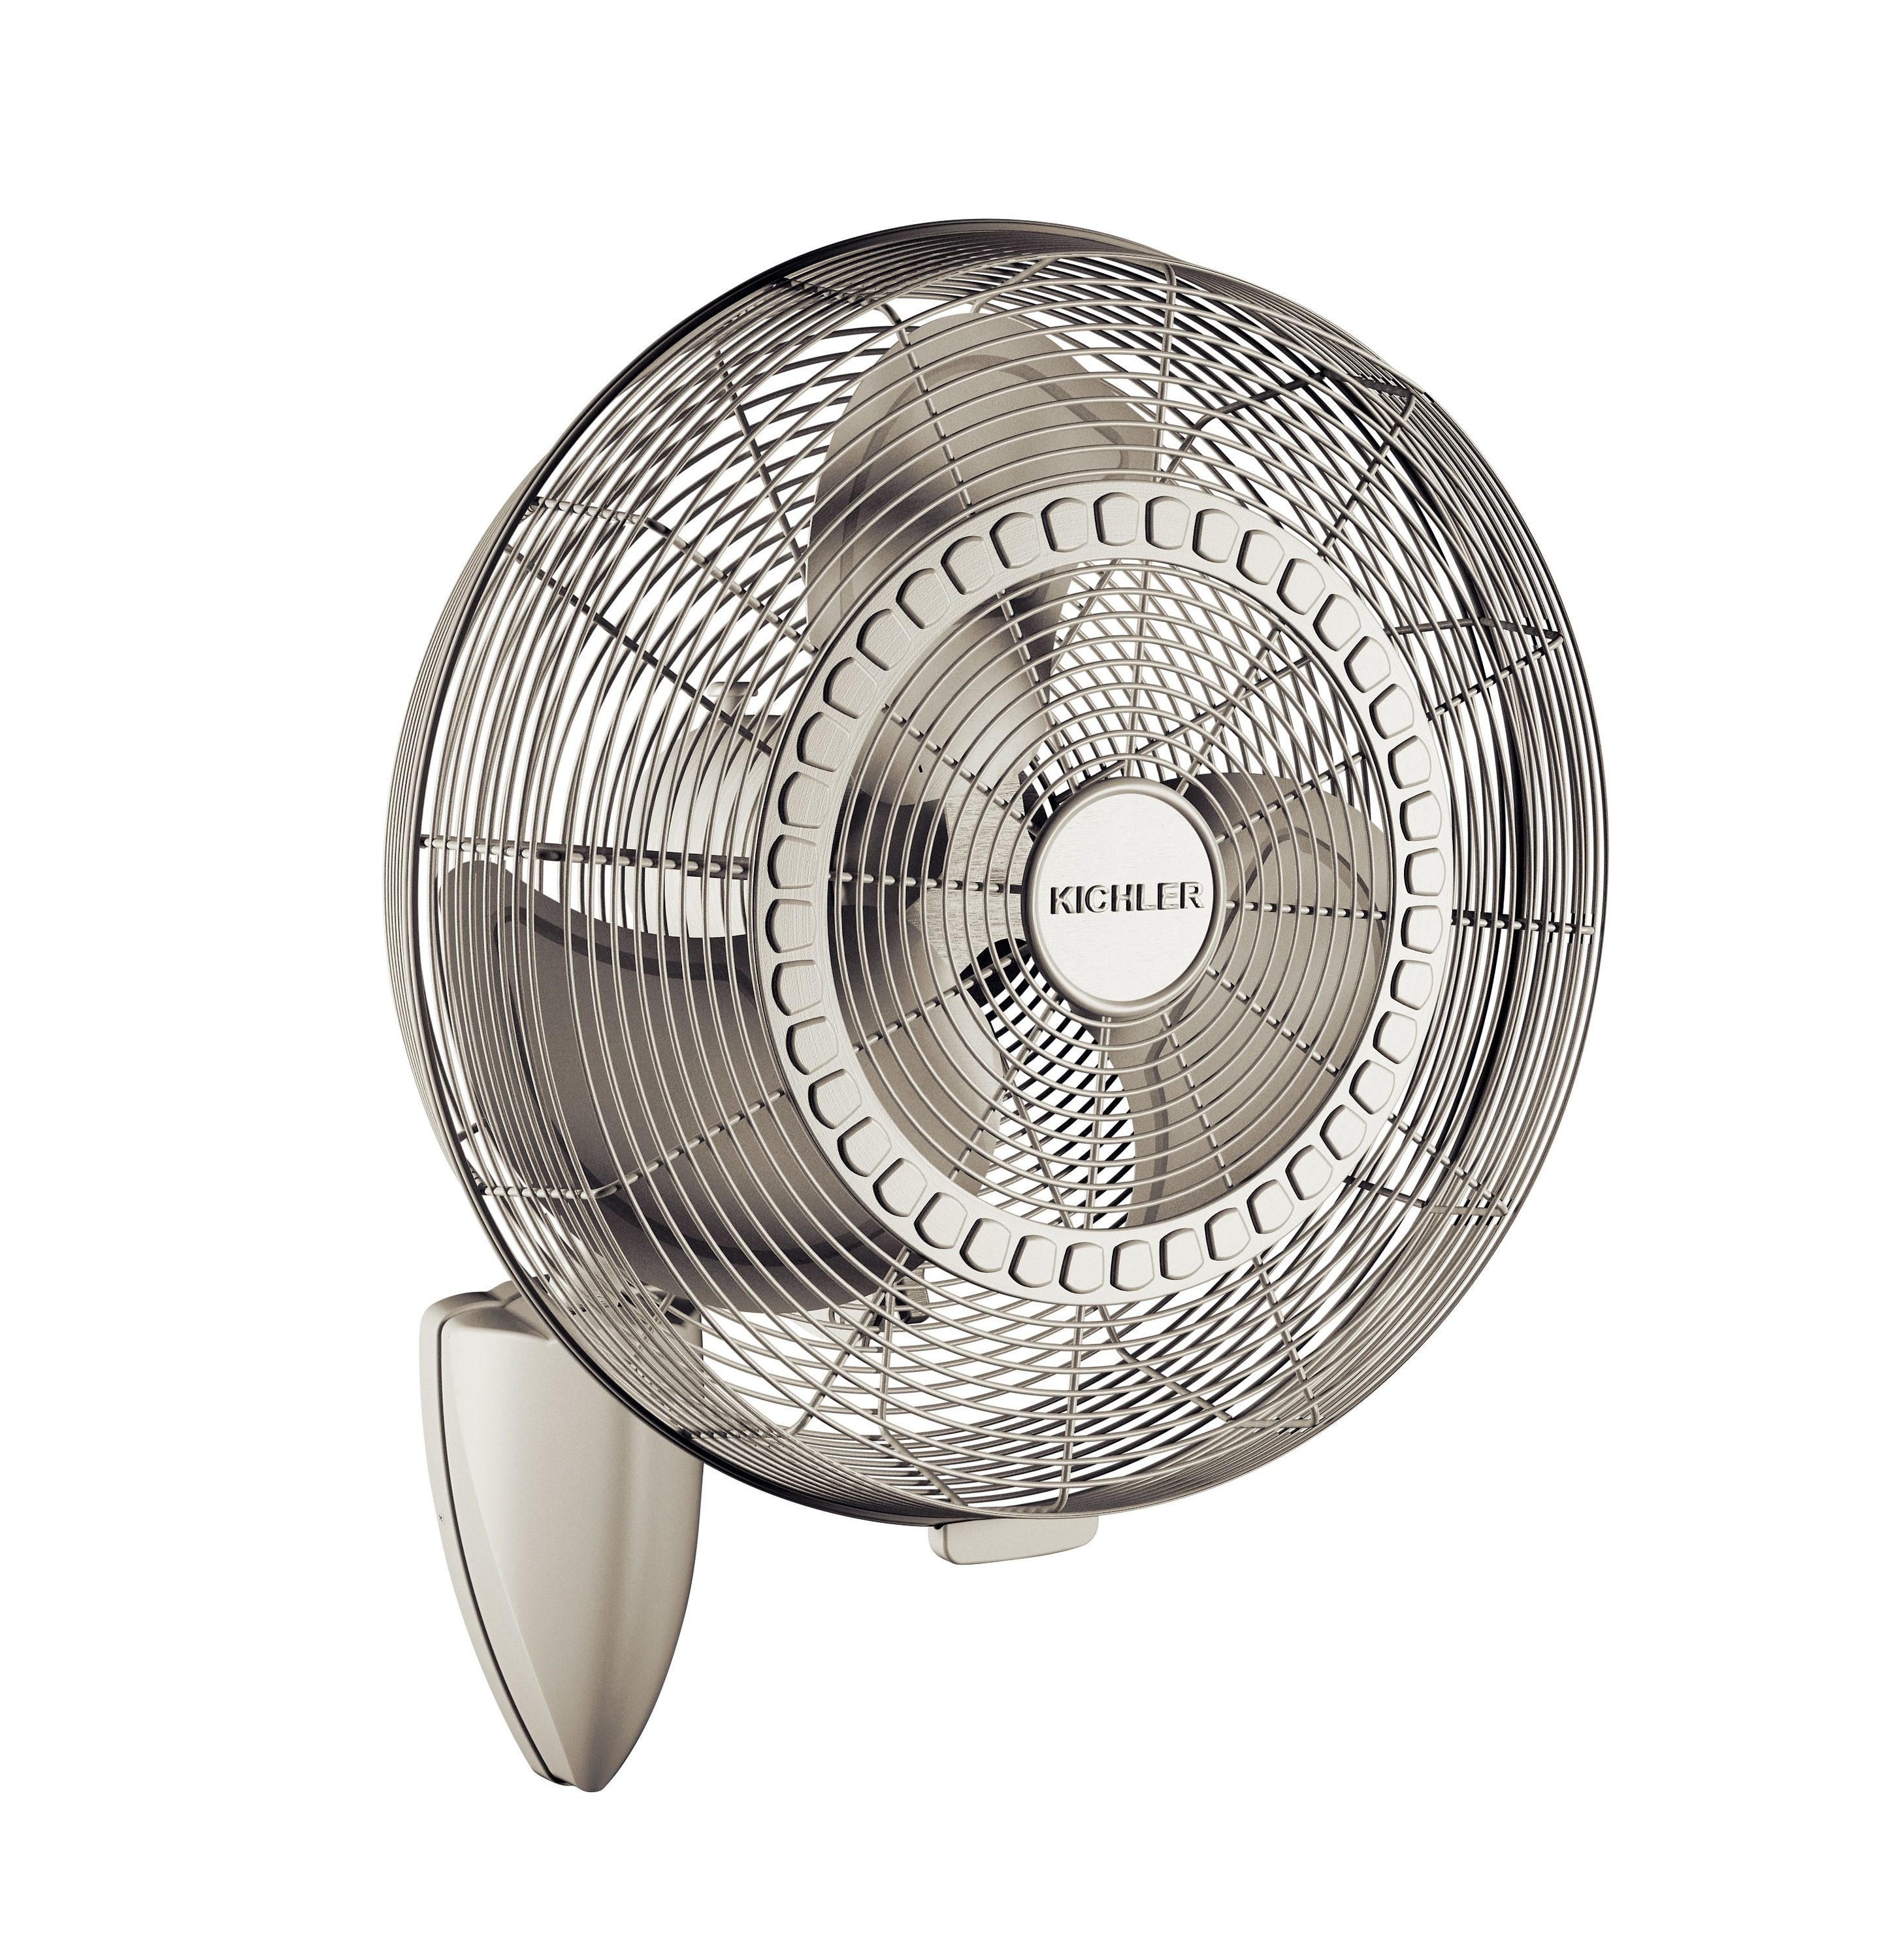 Kichler Pola 18-in Indoor or Outdoor Silver Wall Mounted Fan in